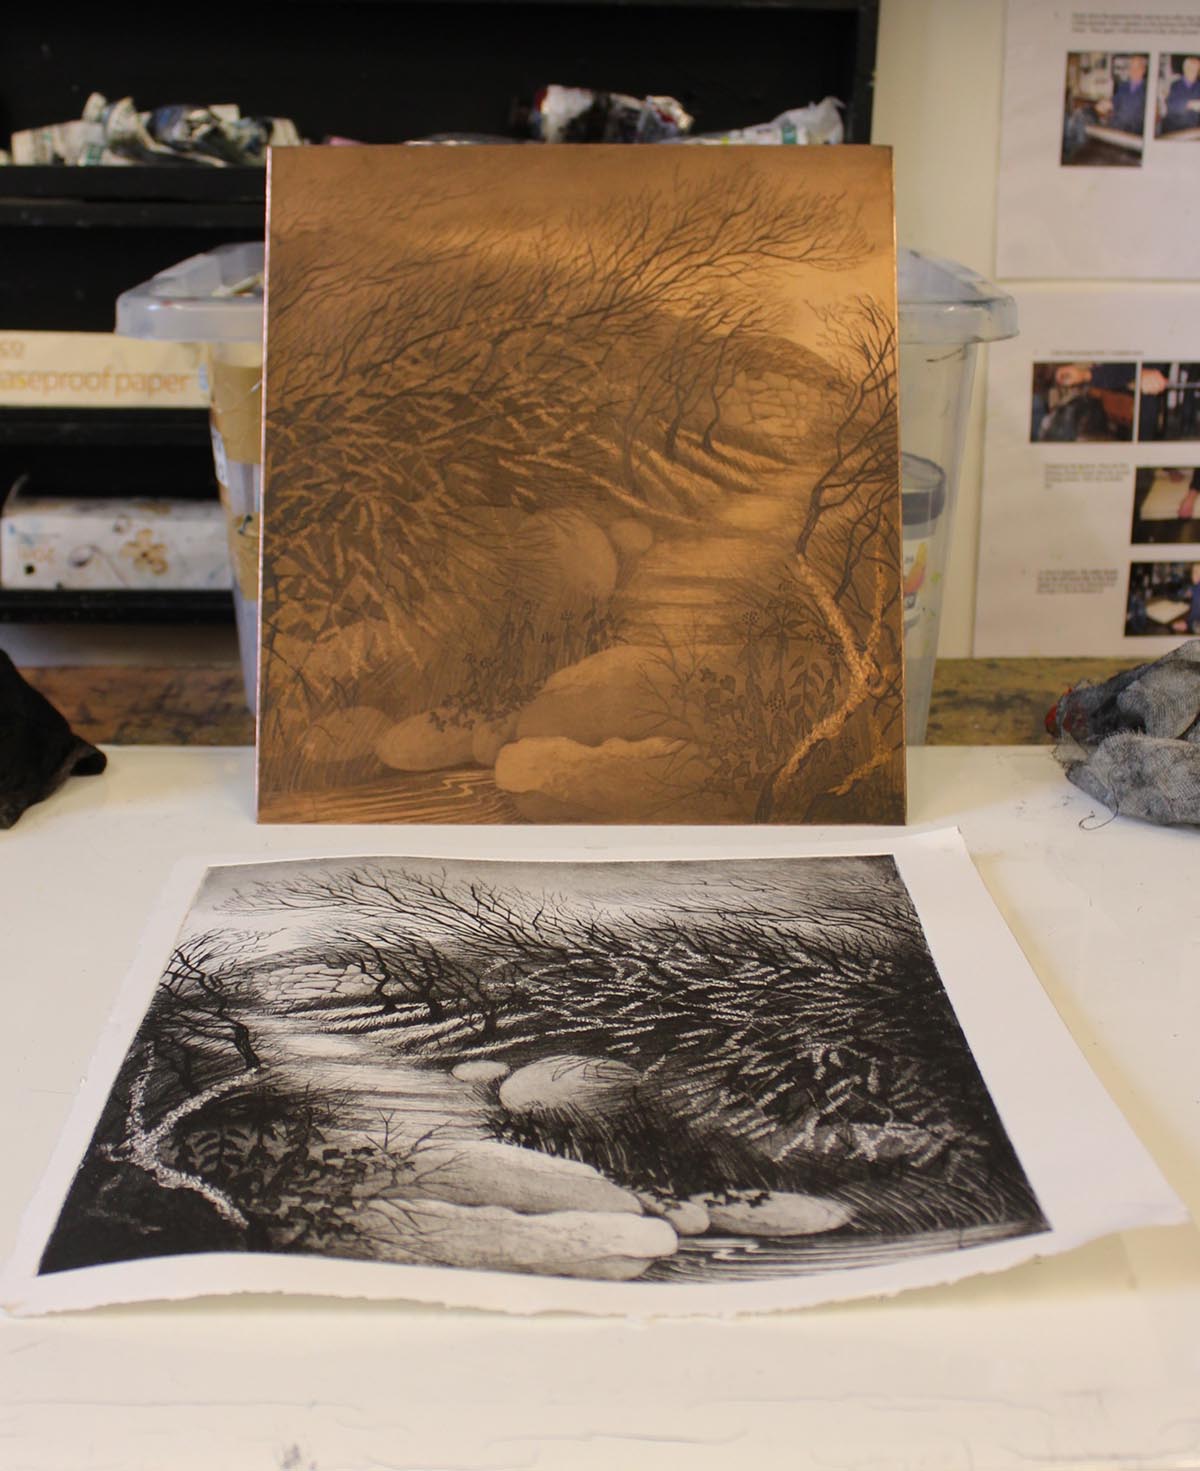 Copper plate etching and printed work by Morna Rhys